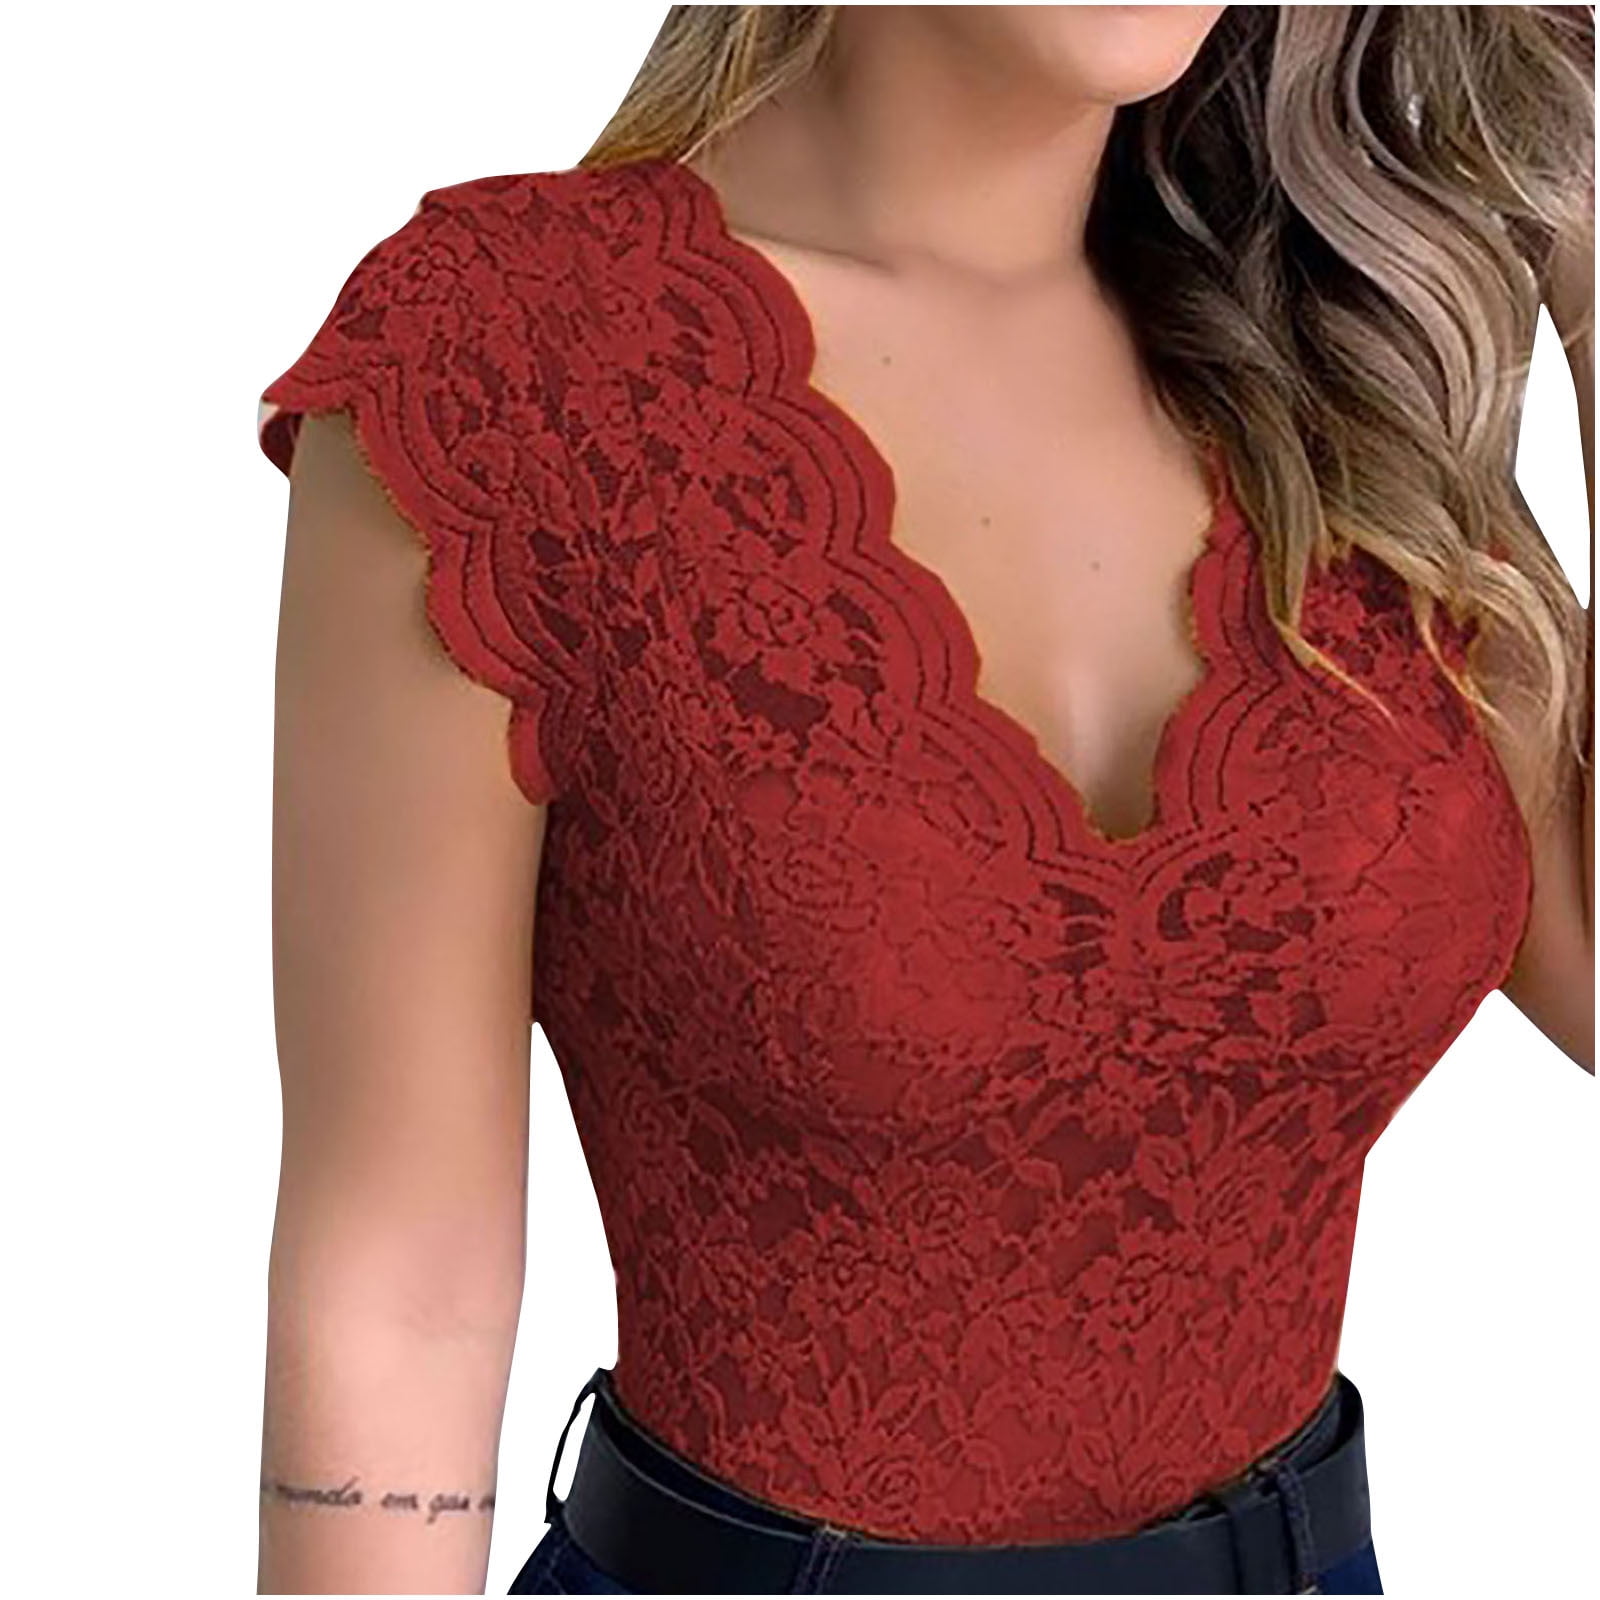 YYDGH Women's Tops Floral Lace Deep V Neck Scalloped Trim Tank Tops  Sleeveless Sheer Sexy Plus Size Blouse Wine Red S